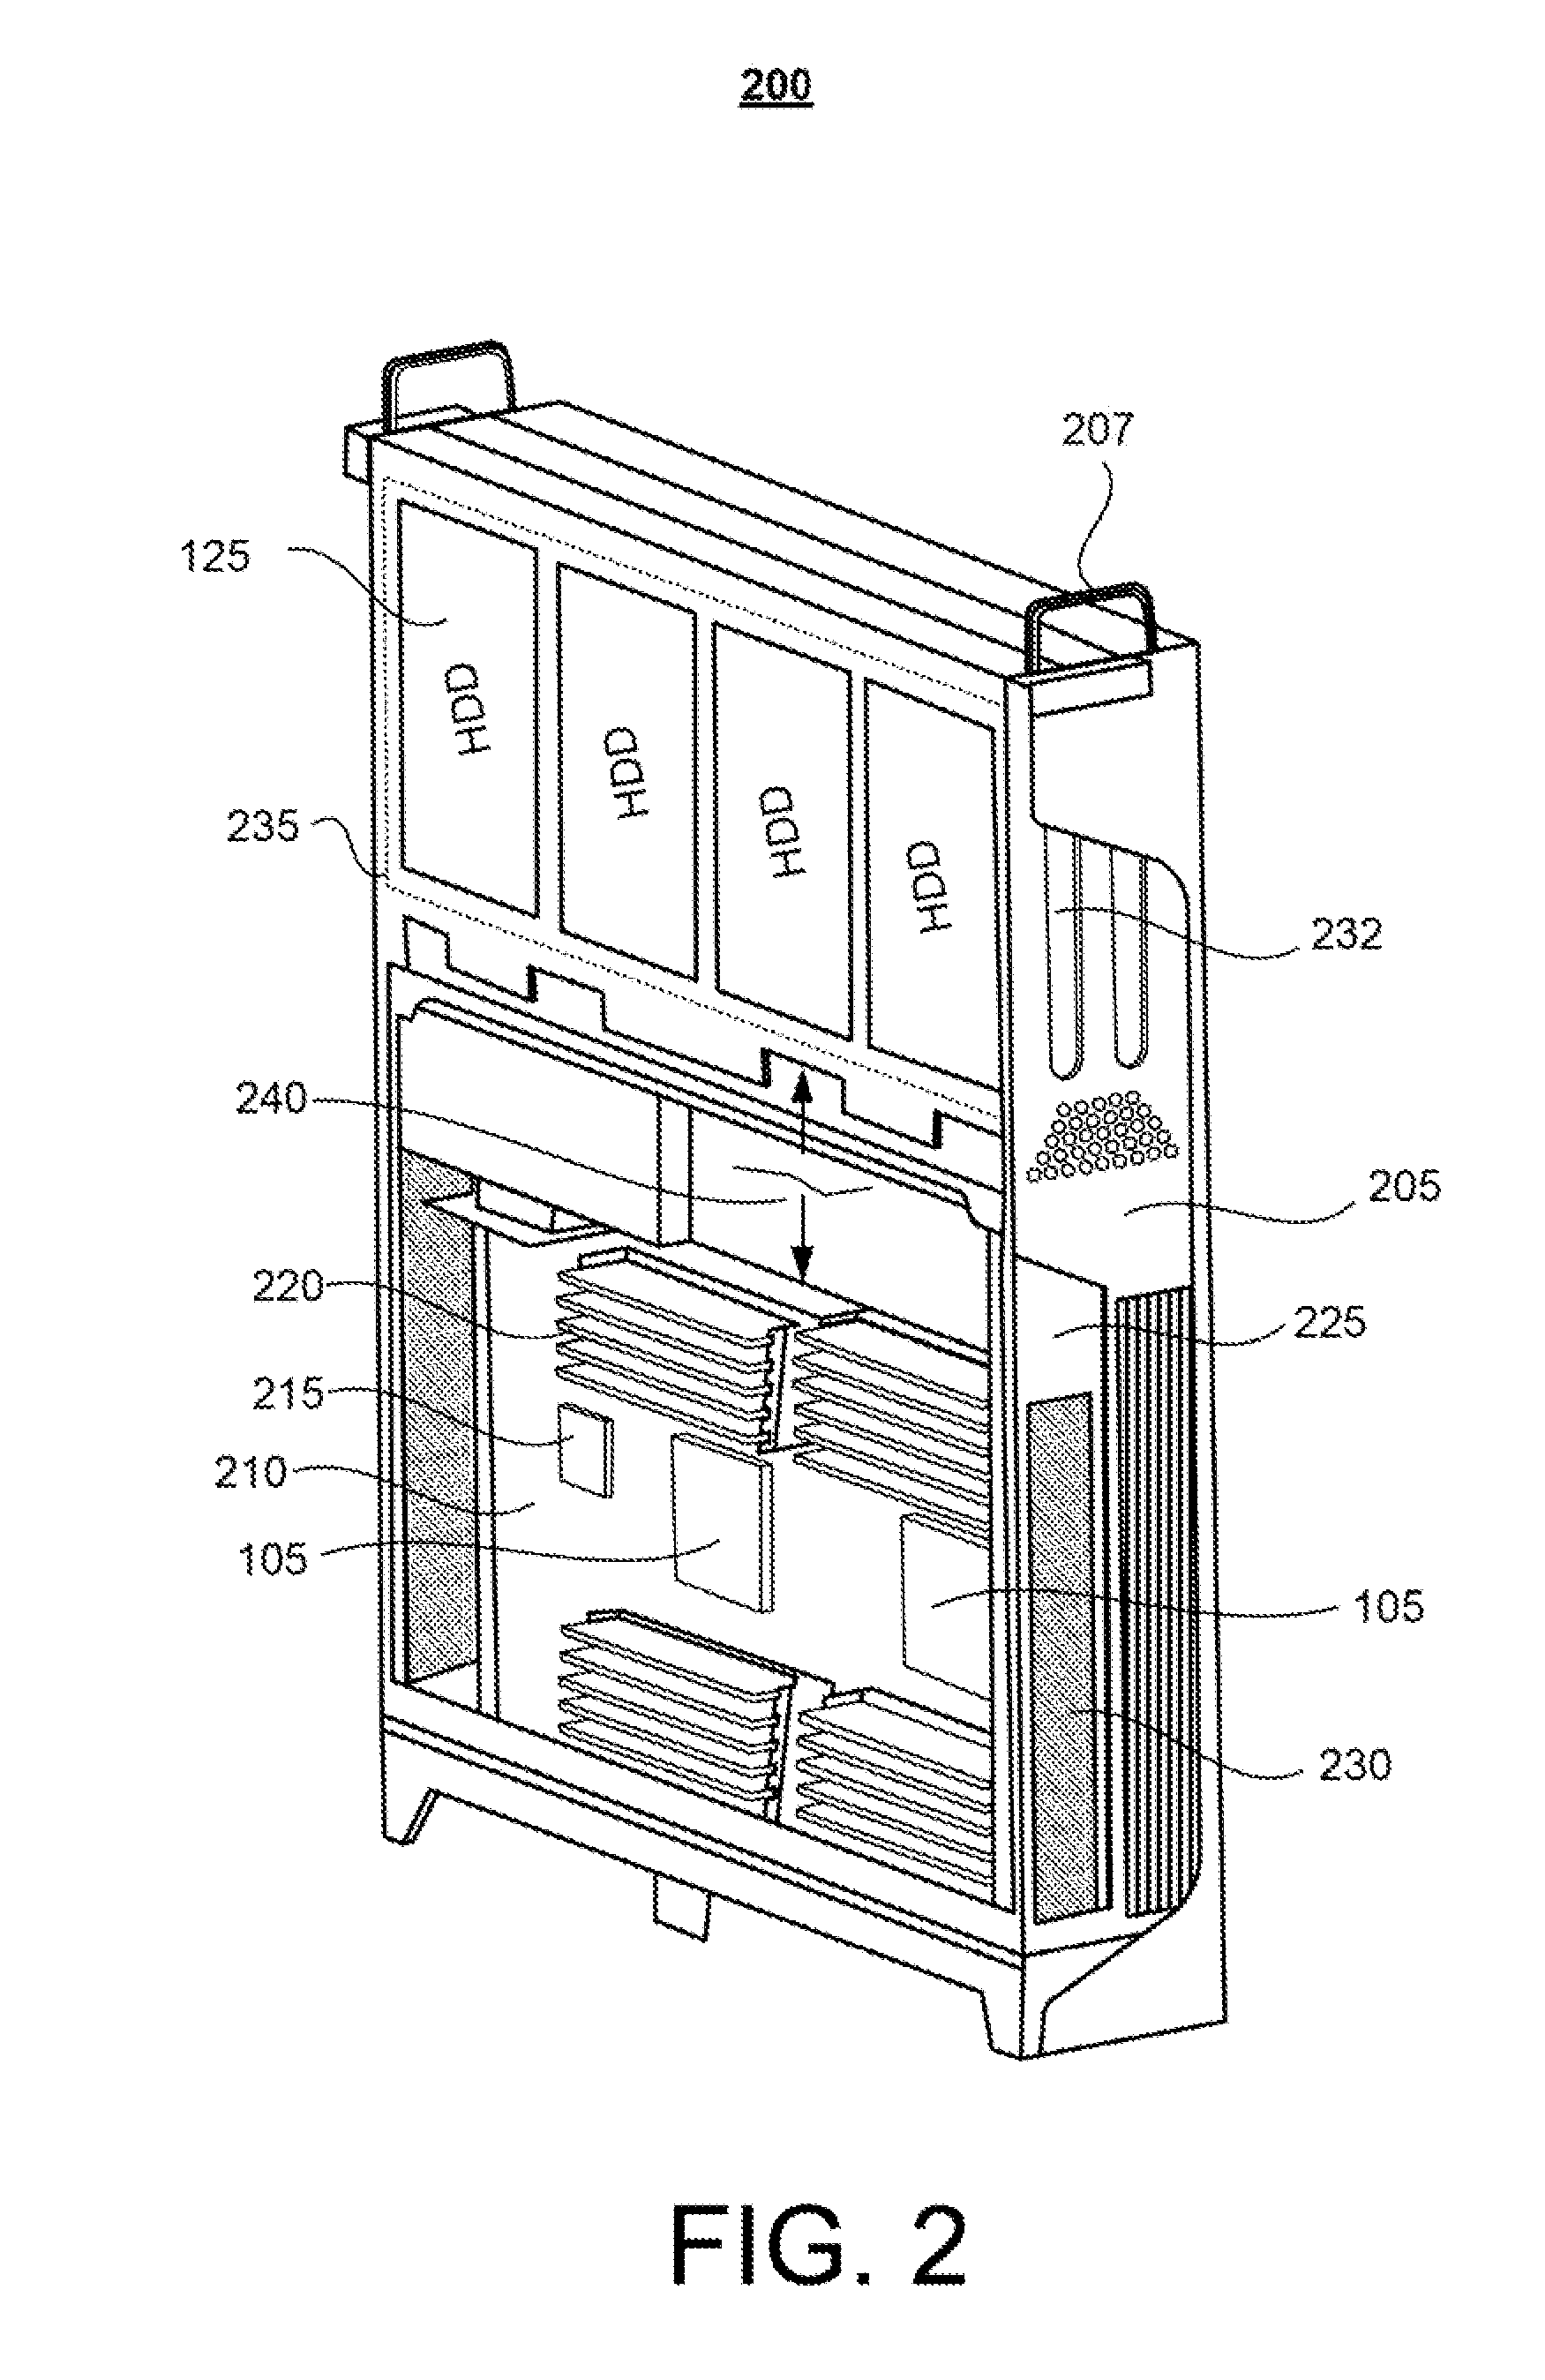 Scalable, Multi-Vessel Distribution System for Liquid Level Control Within Immersion Cooling Tanks